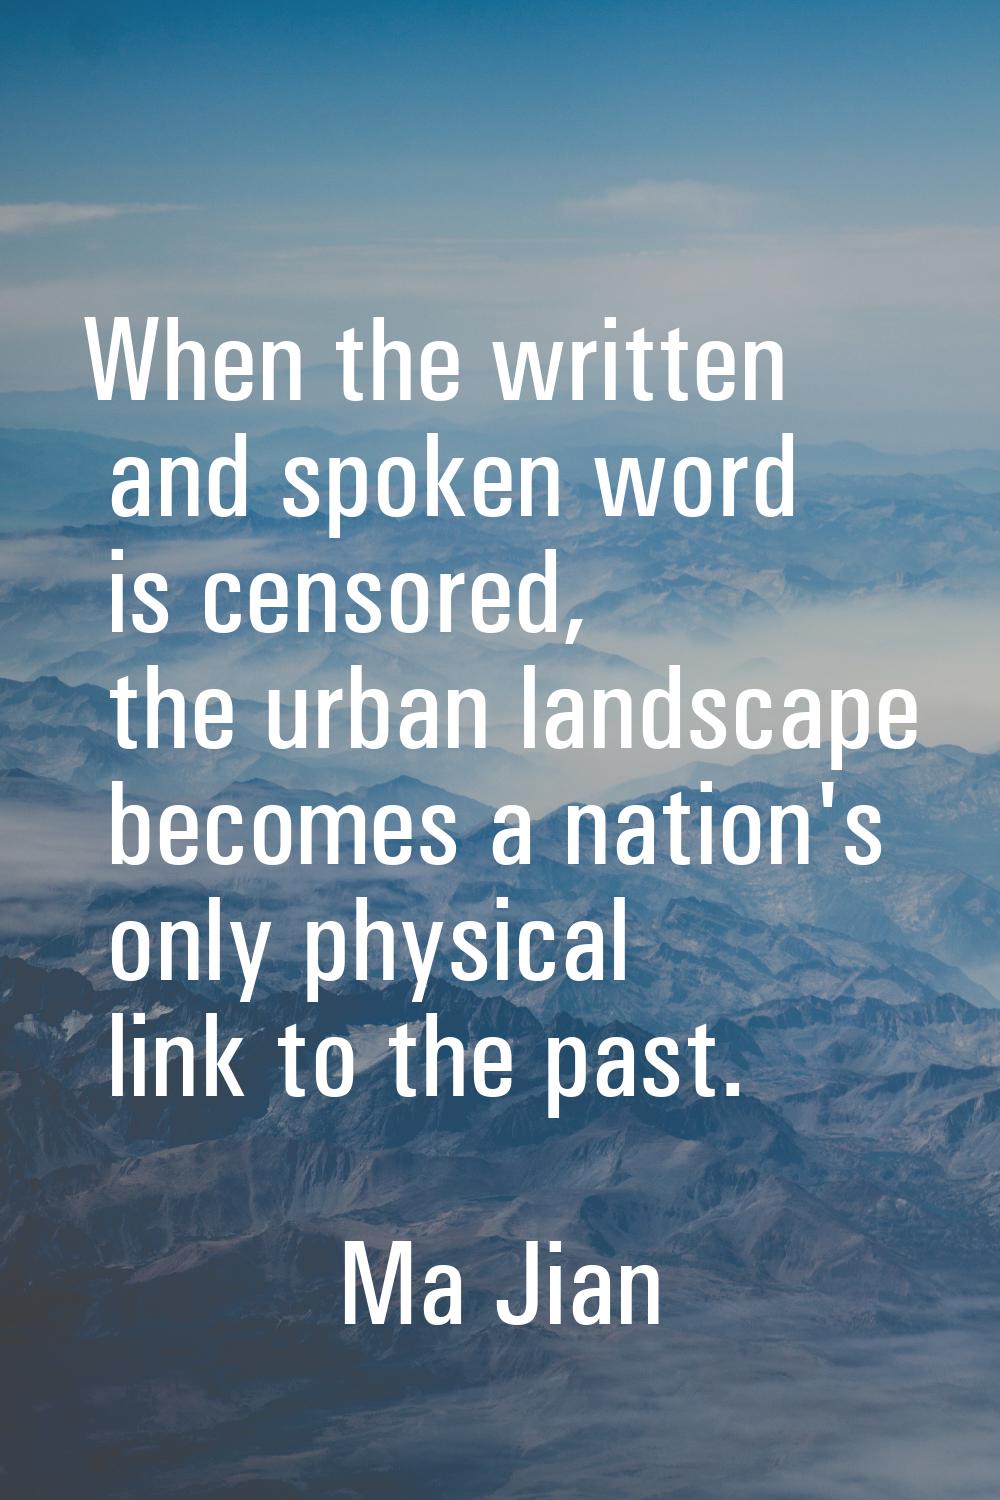 When the written and spoken word is censored, the urban landscape becomes a nation's only physical 